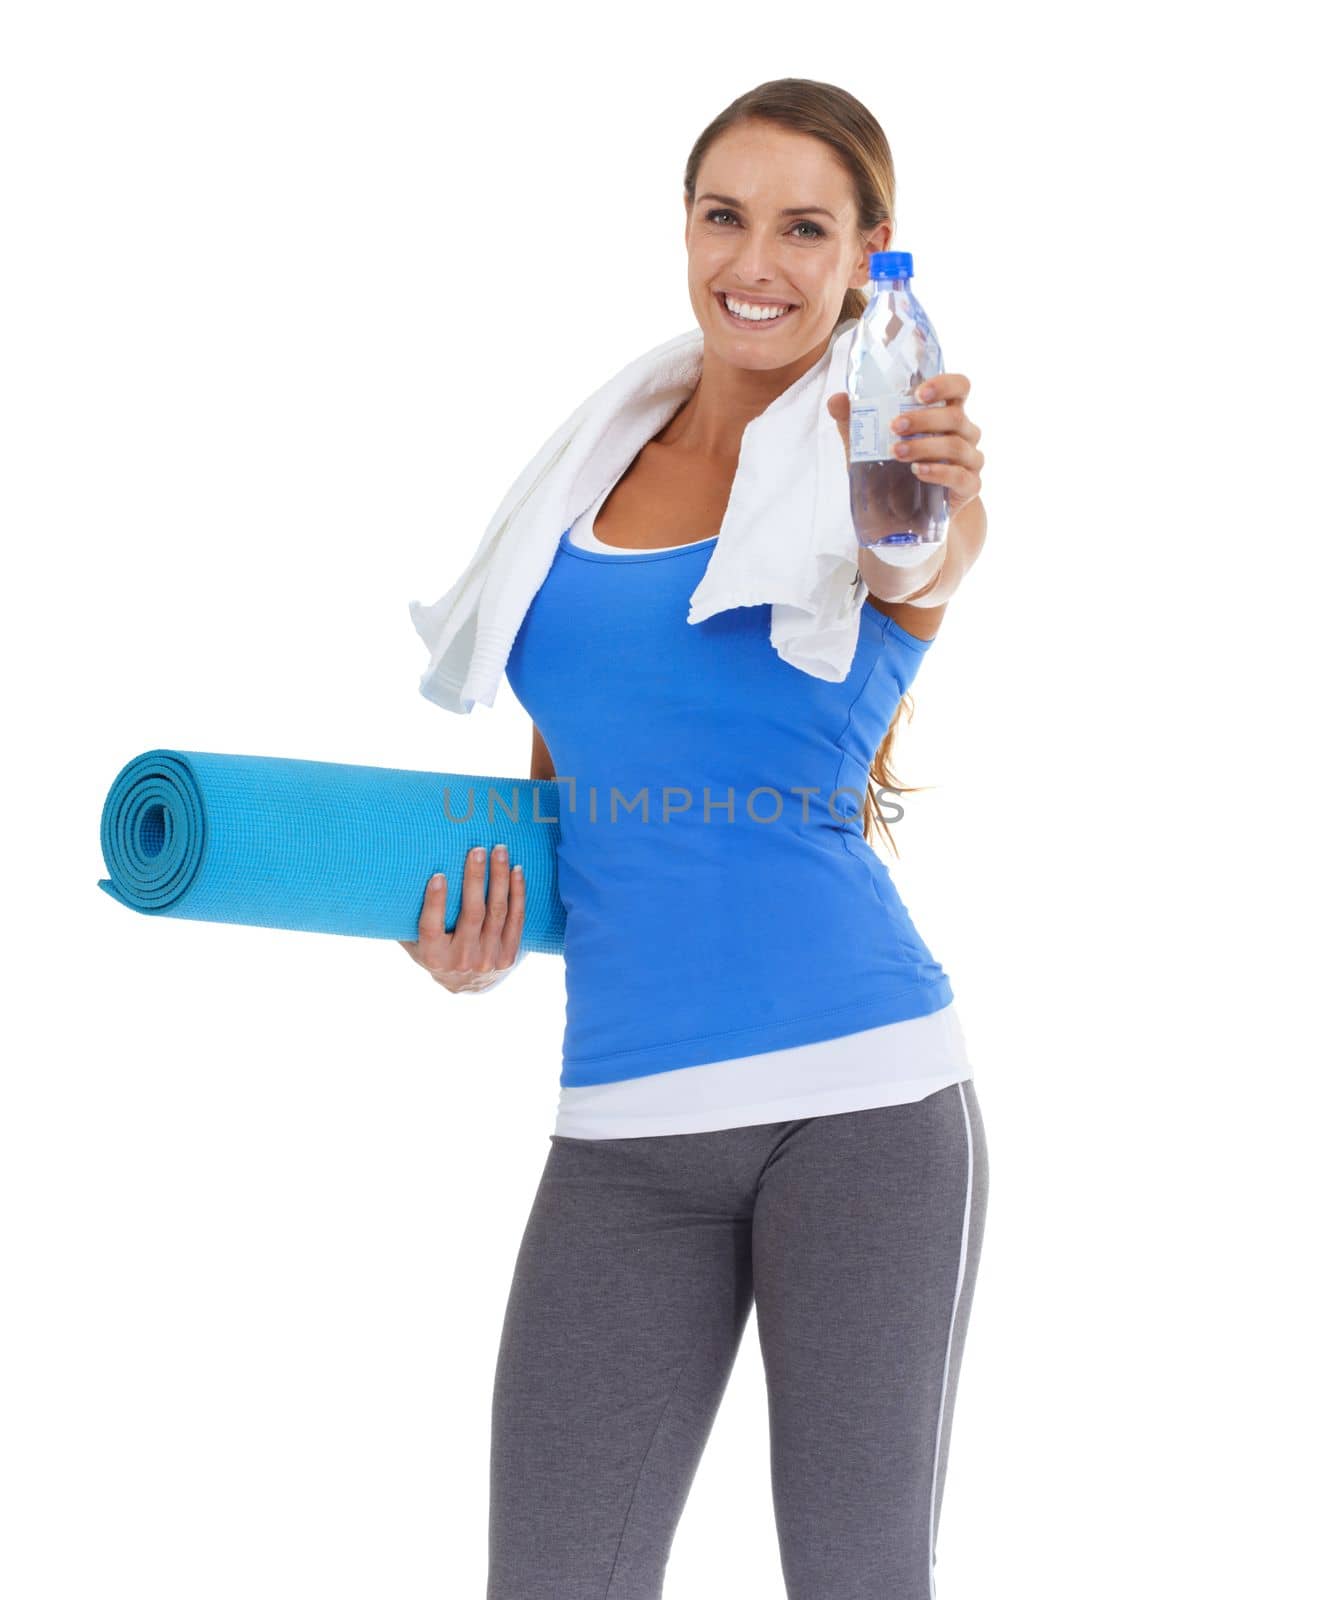 Keep water at the ready - Health tips. Fit young woman holding a pilates mat and water bottle with a smile - isolated on white